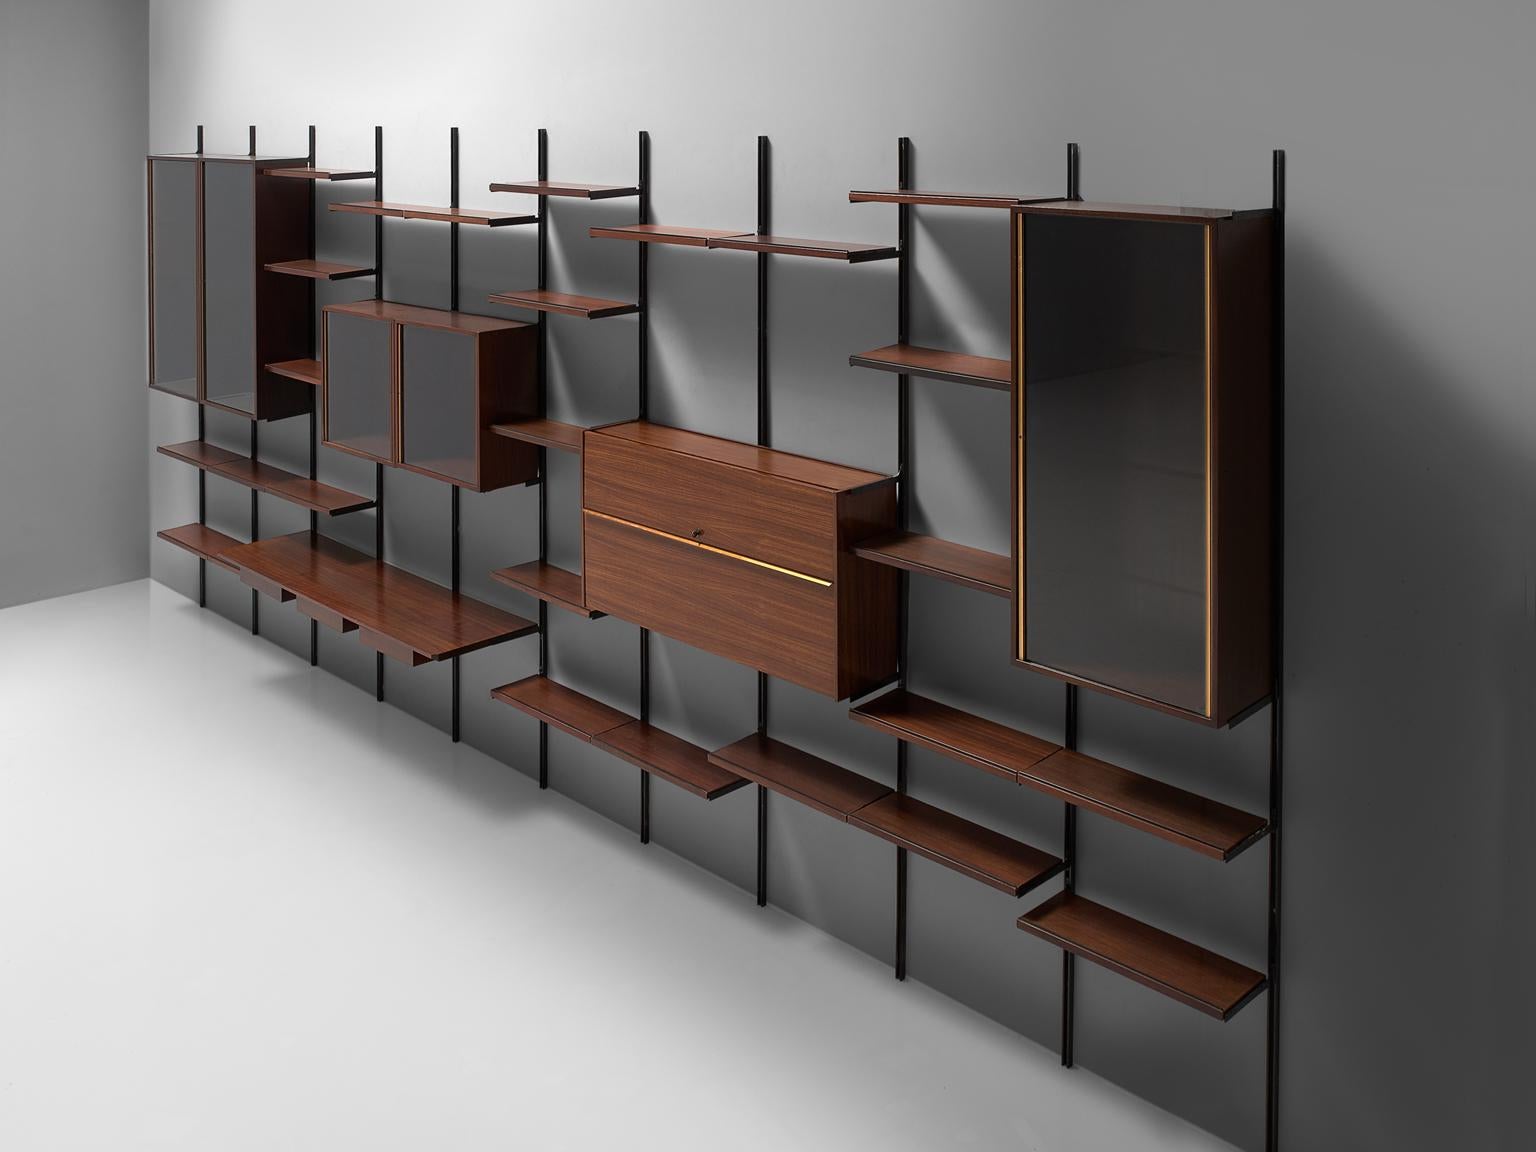 Osvaldo Borsani for Tecno, bookcase or wall unit E22, metal, rosewood and glass, Italy, 1950s.

This wall-mounted shelving unit is ten sections large, with a width of 7 metres. This system was developed by Borsani as coordinated system for